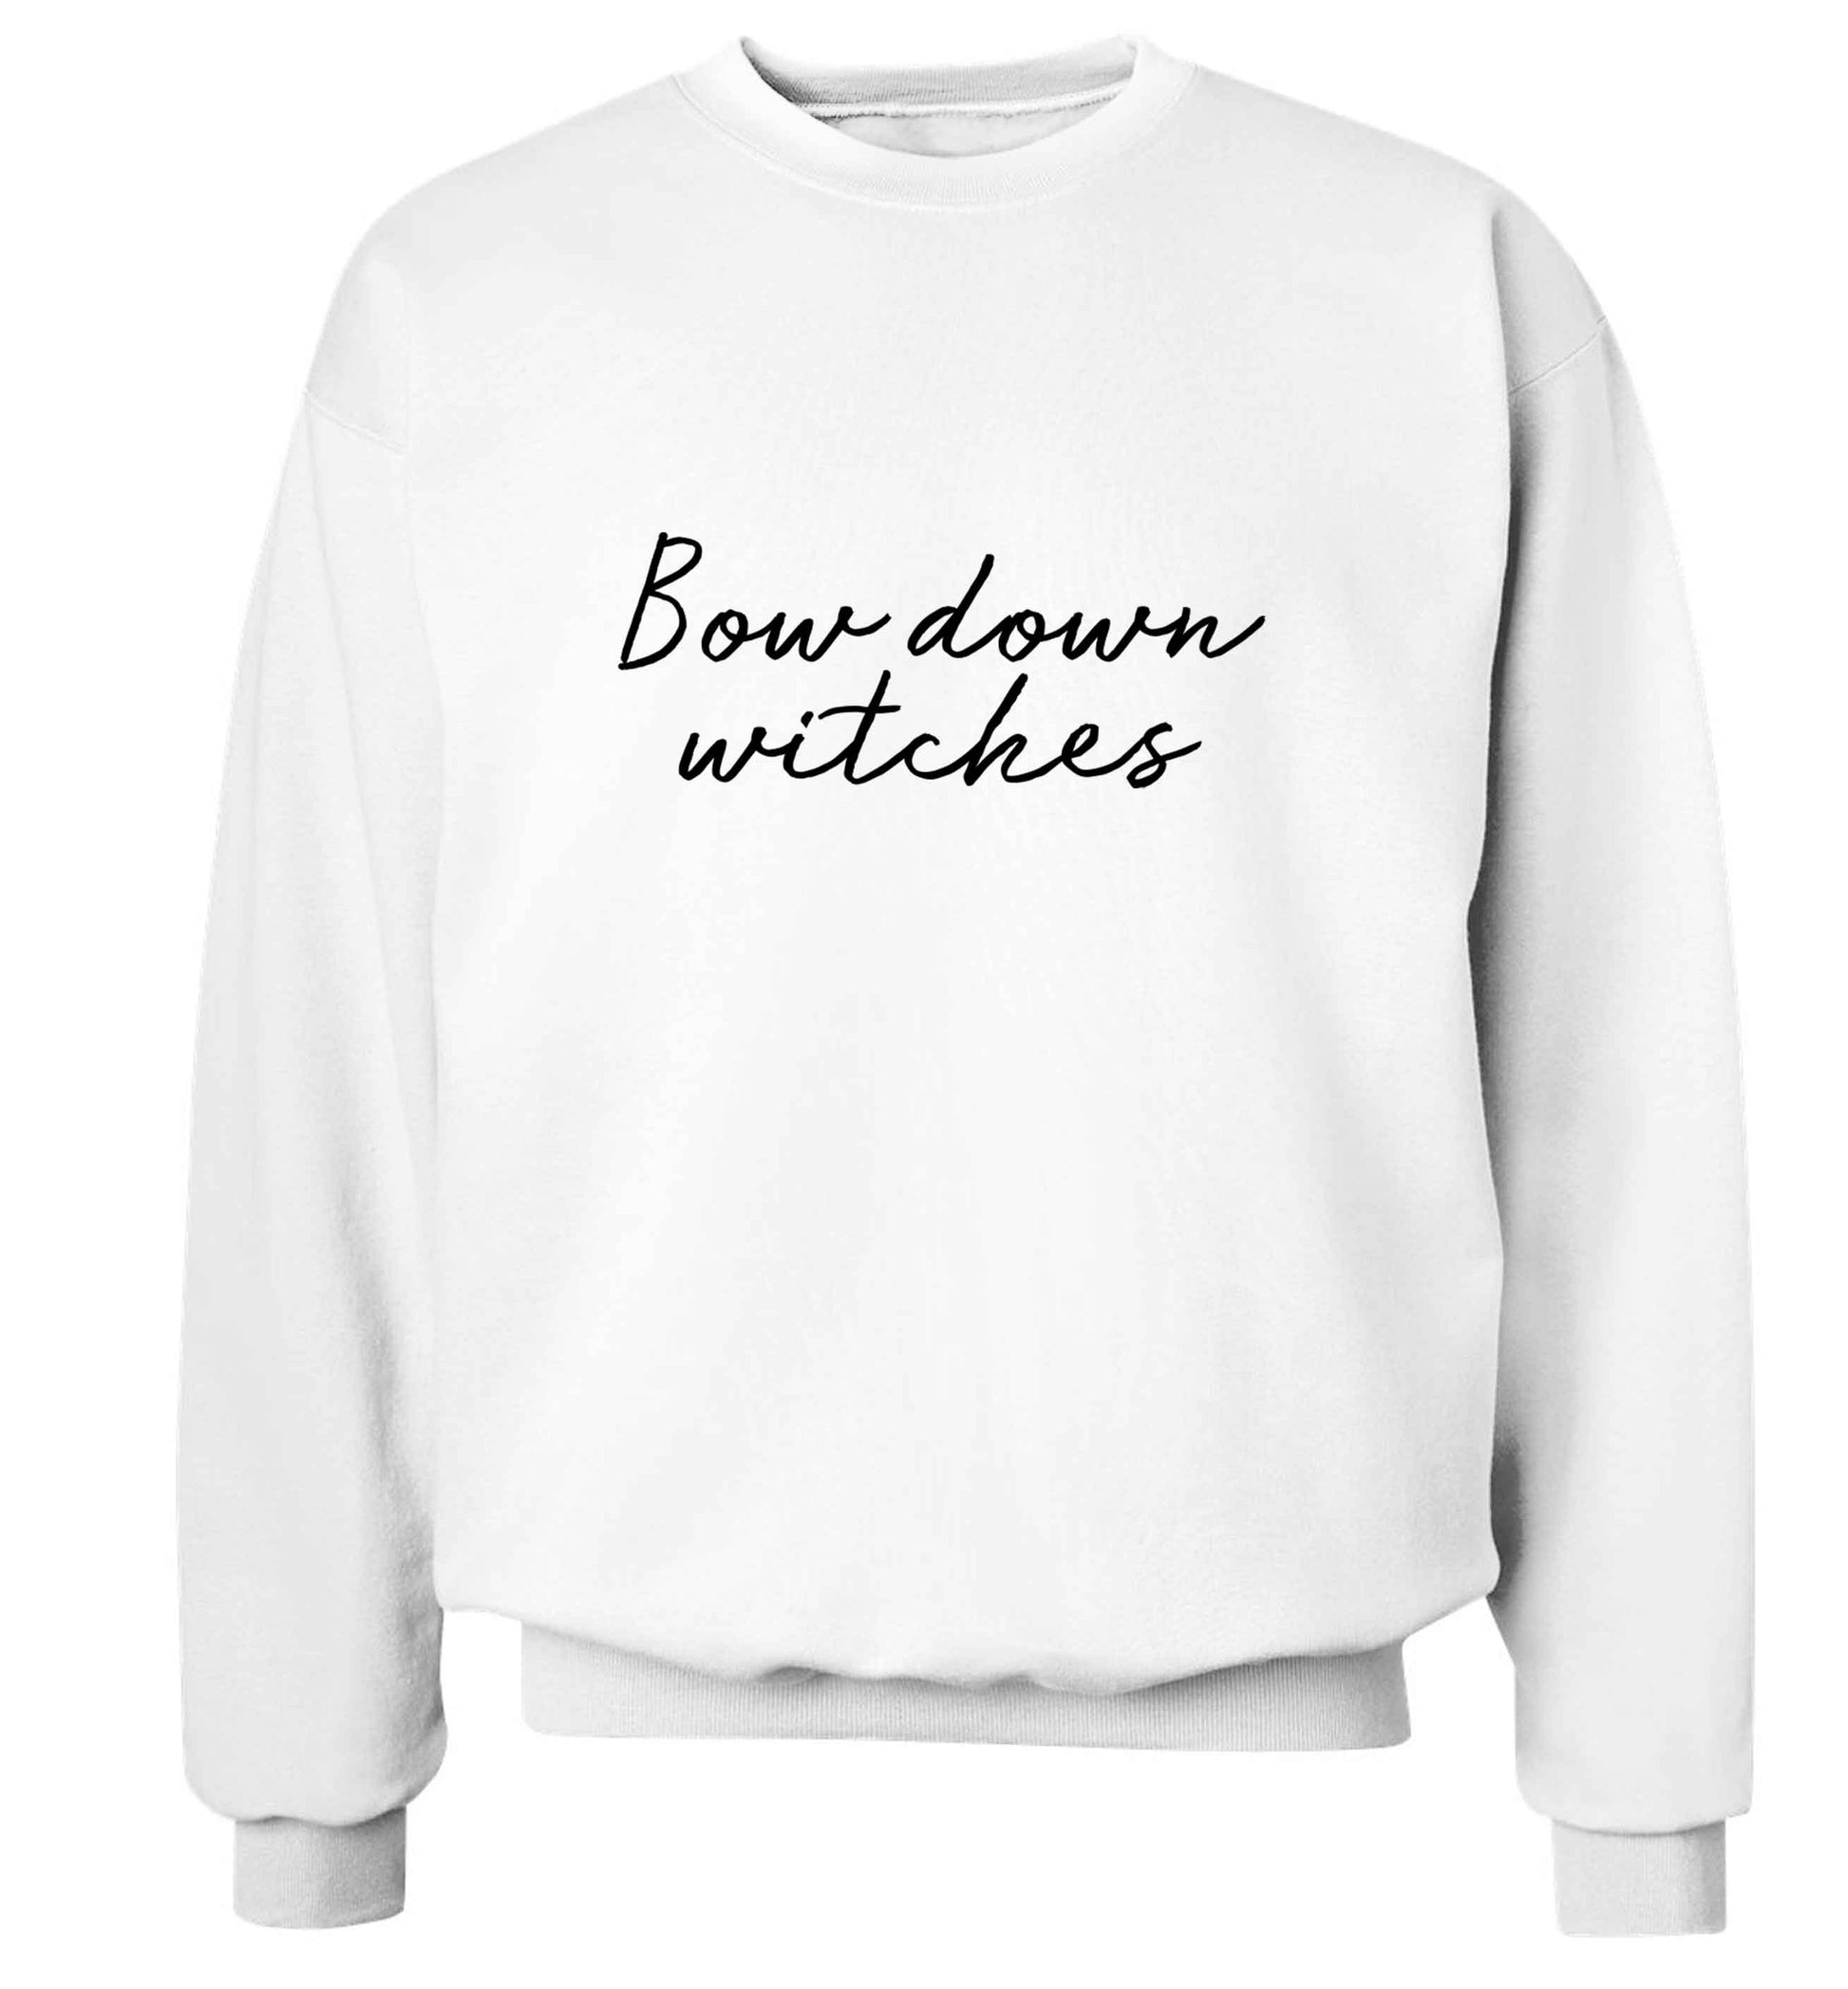 Bow down witches adult's unisex white sweater 2XL